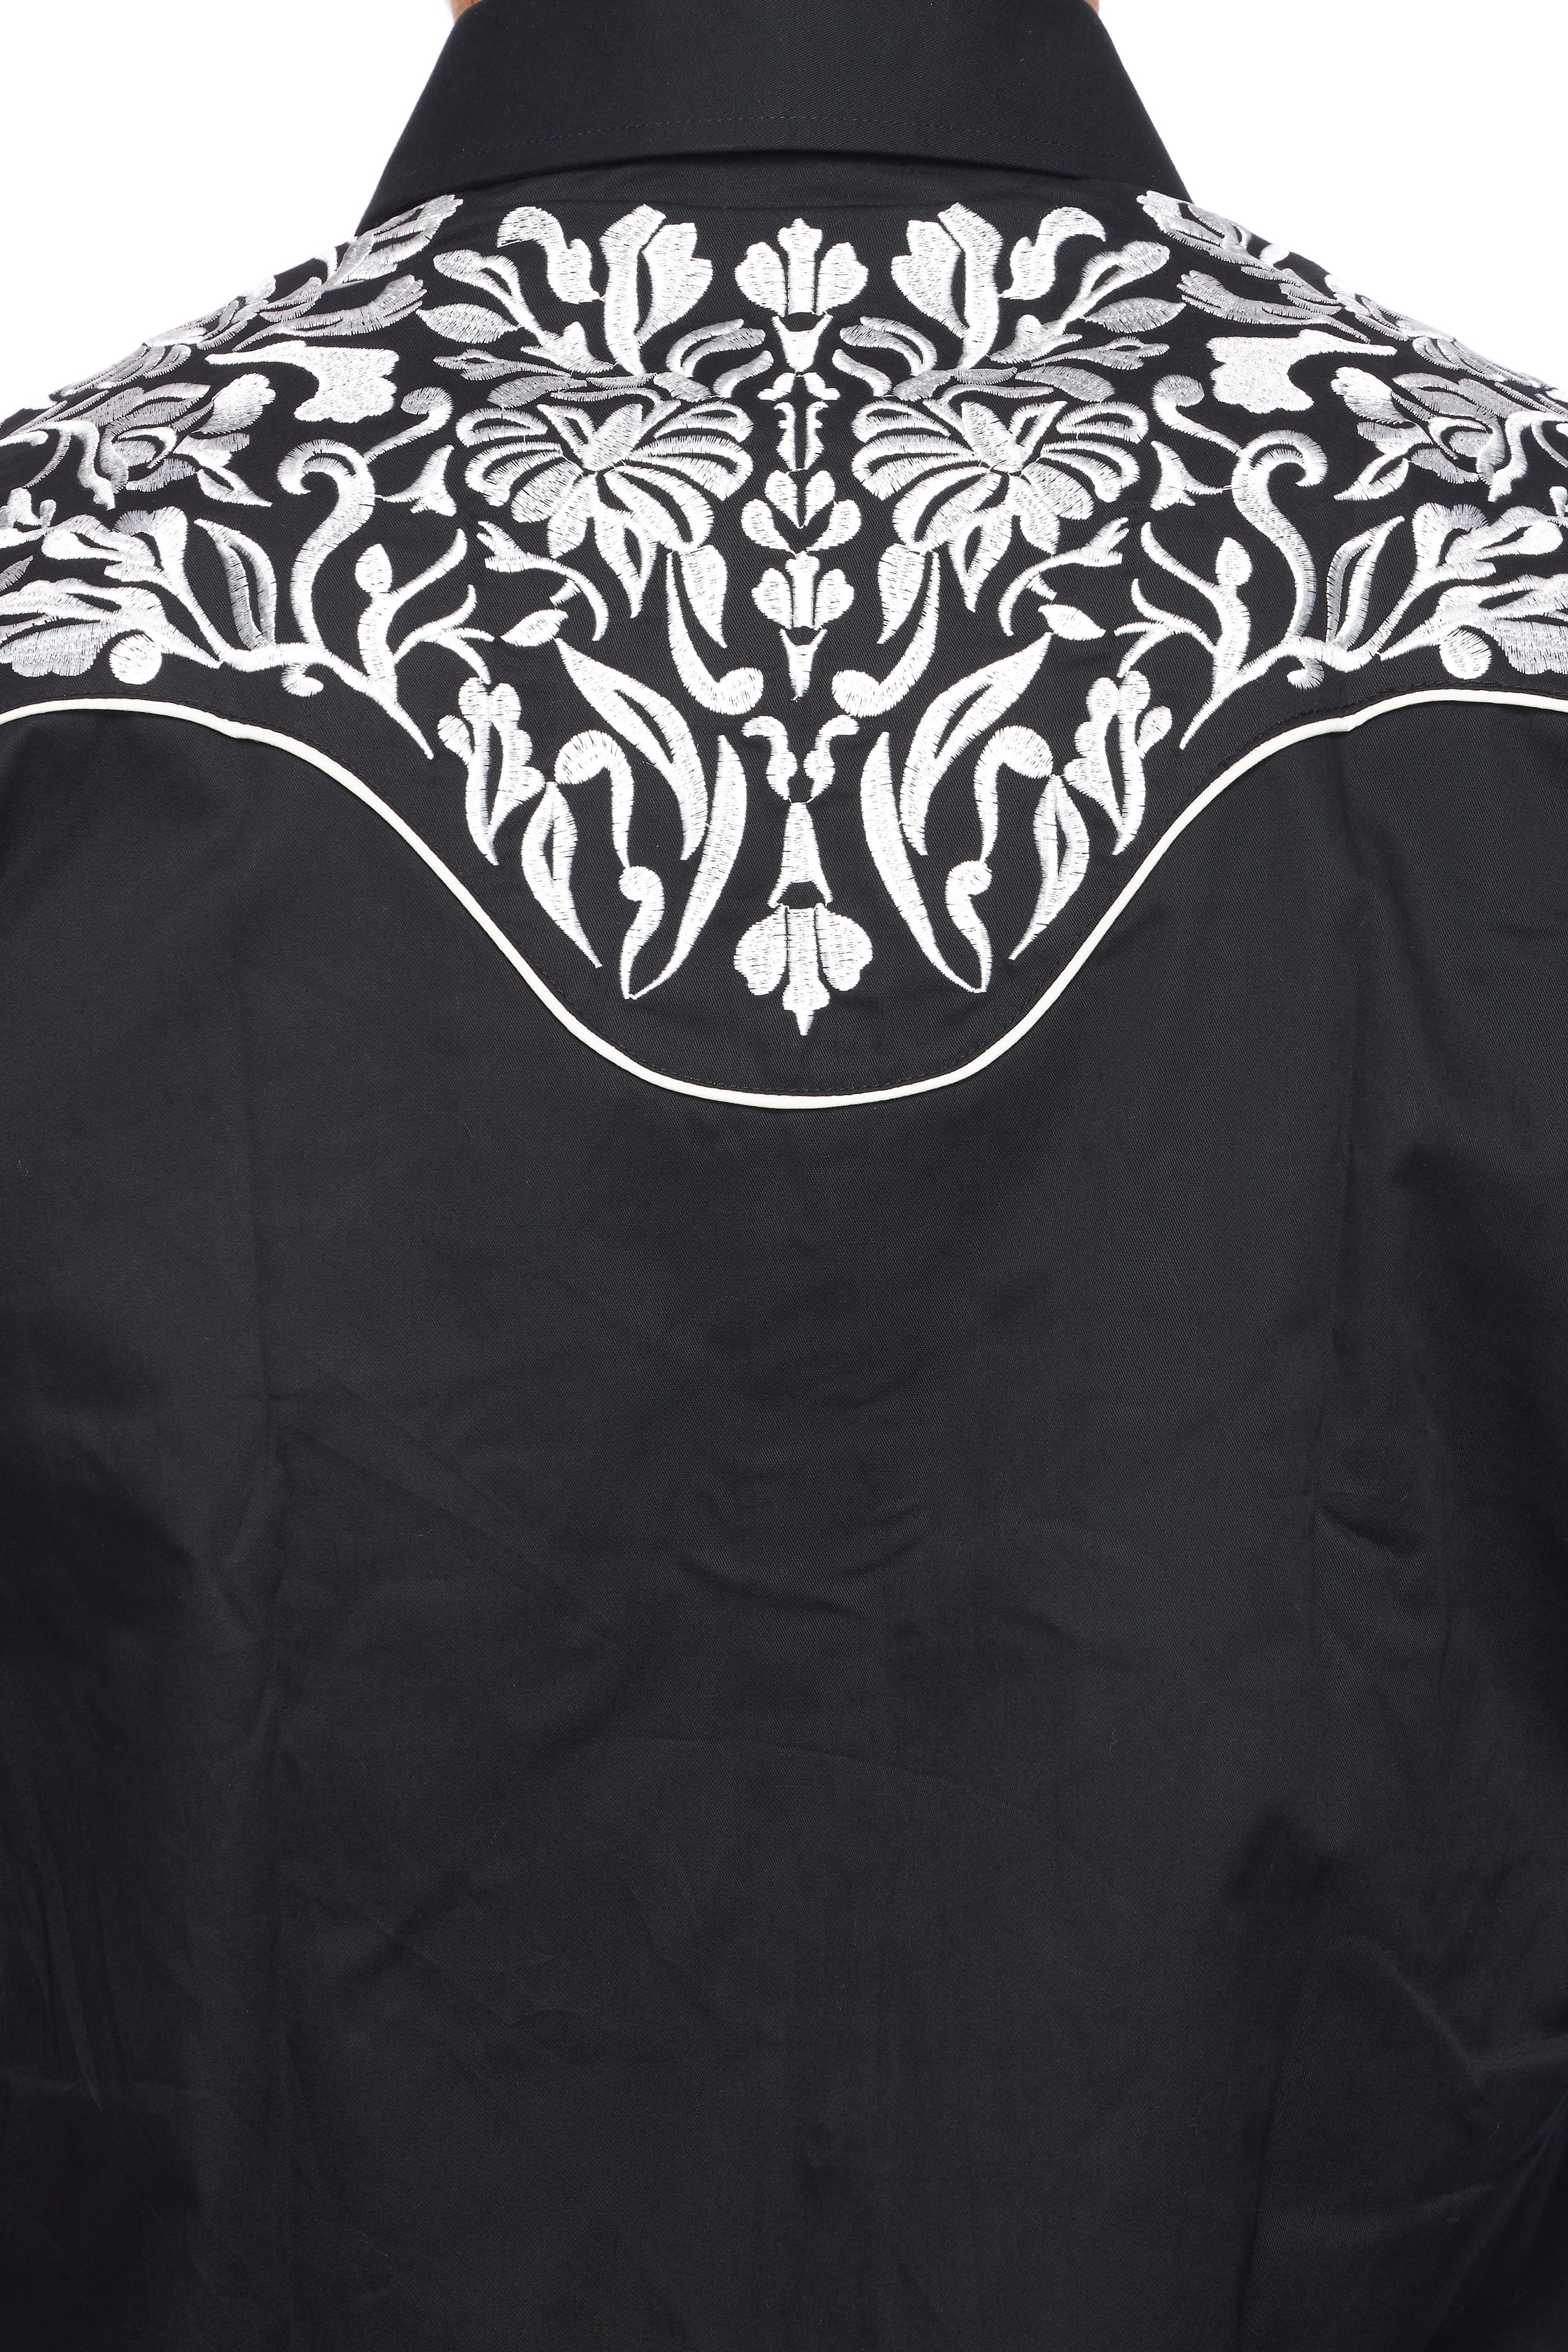 Men's Black Long Sleeve Western Shirt w White Floral Embroidery